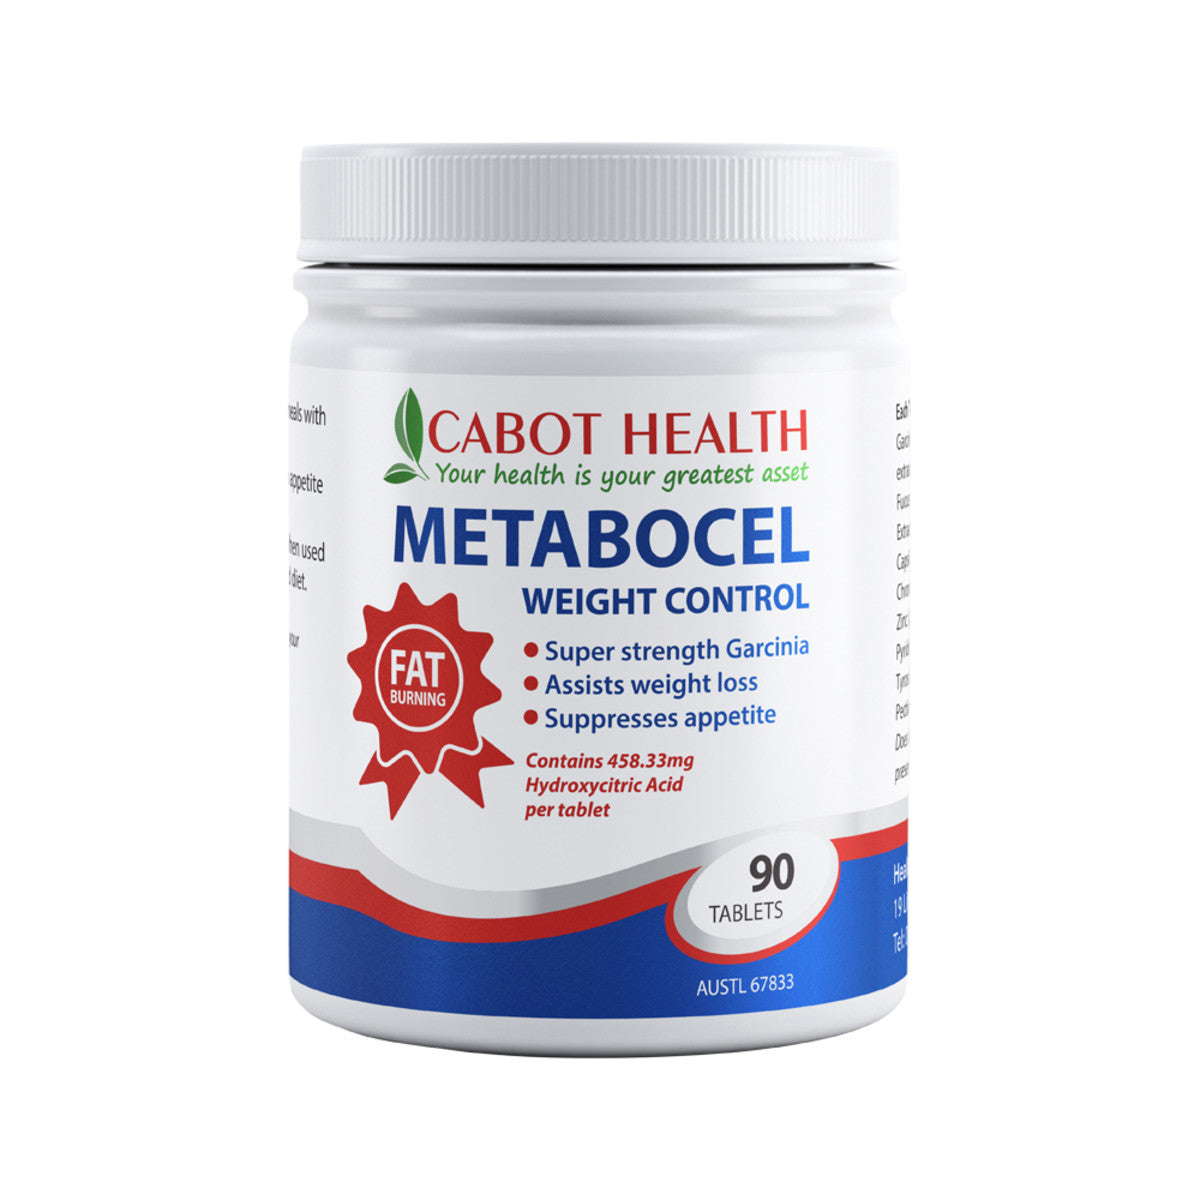 Cabot Health - Metabocel Weight Control